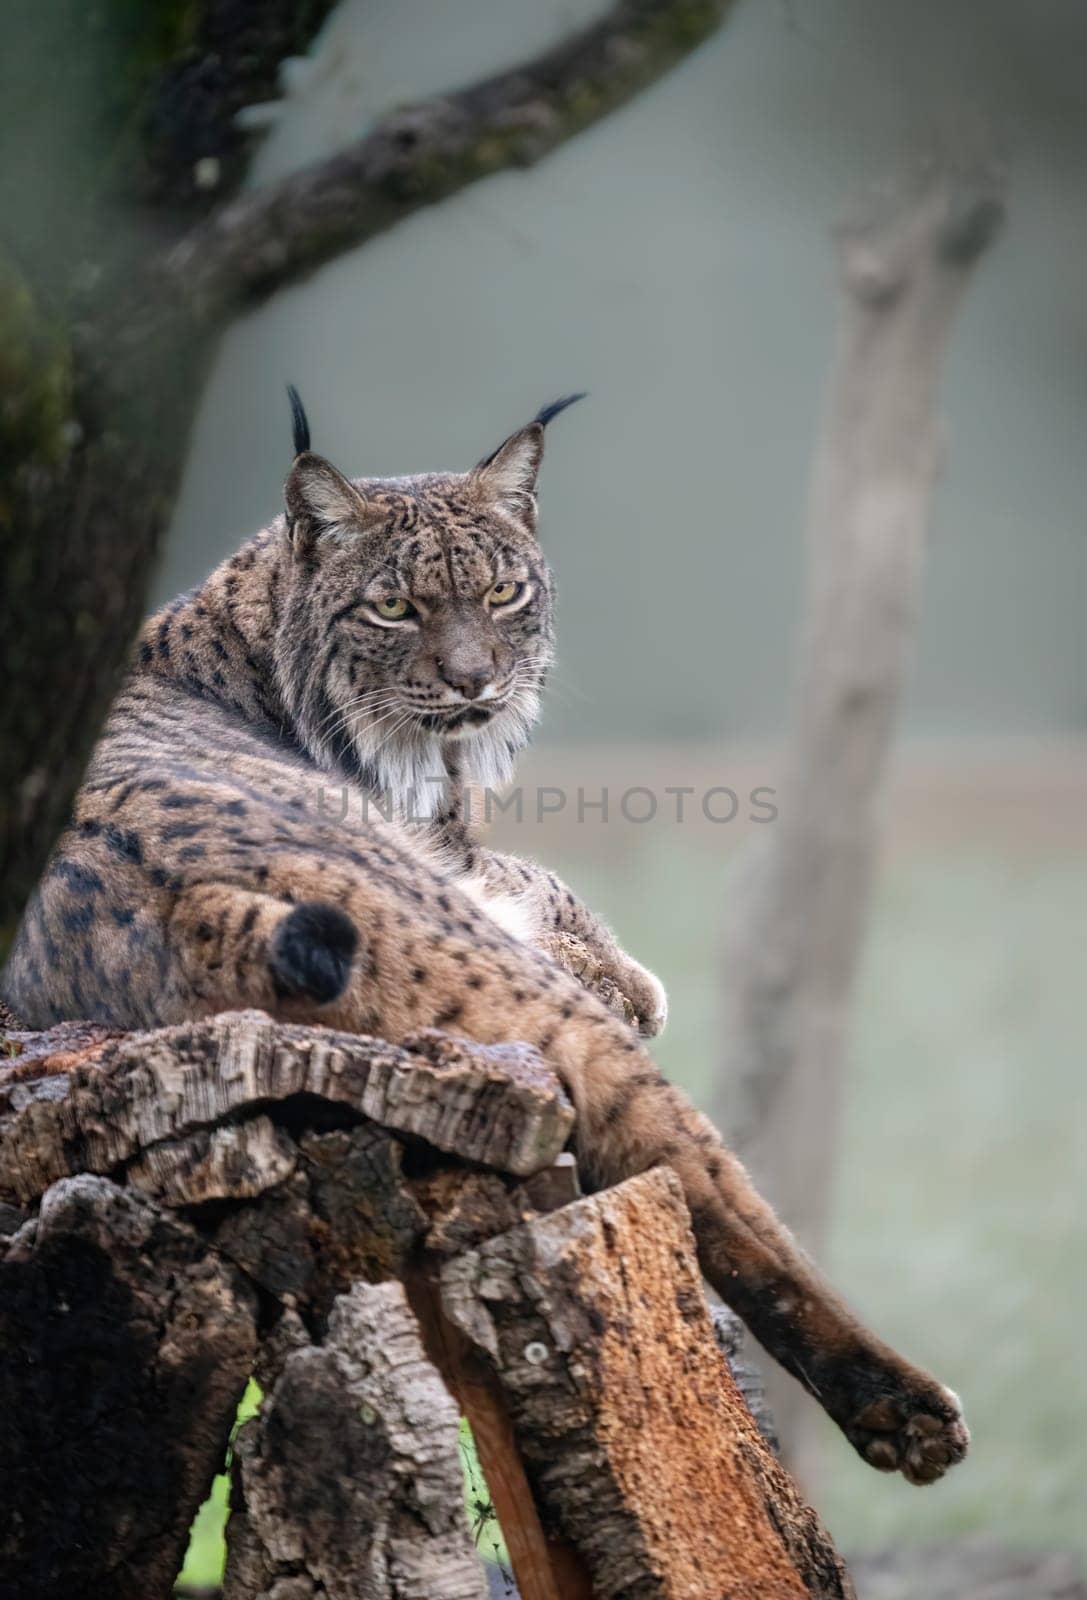 Iberian Lynx lounges on log, displaying its regal aura and sharp eyes in natural habitat